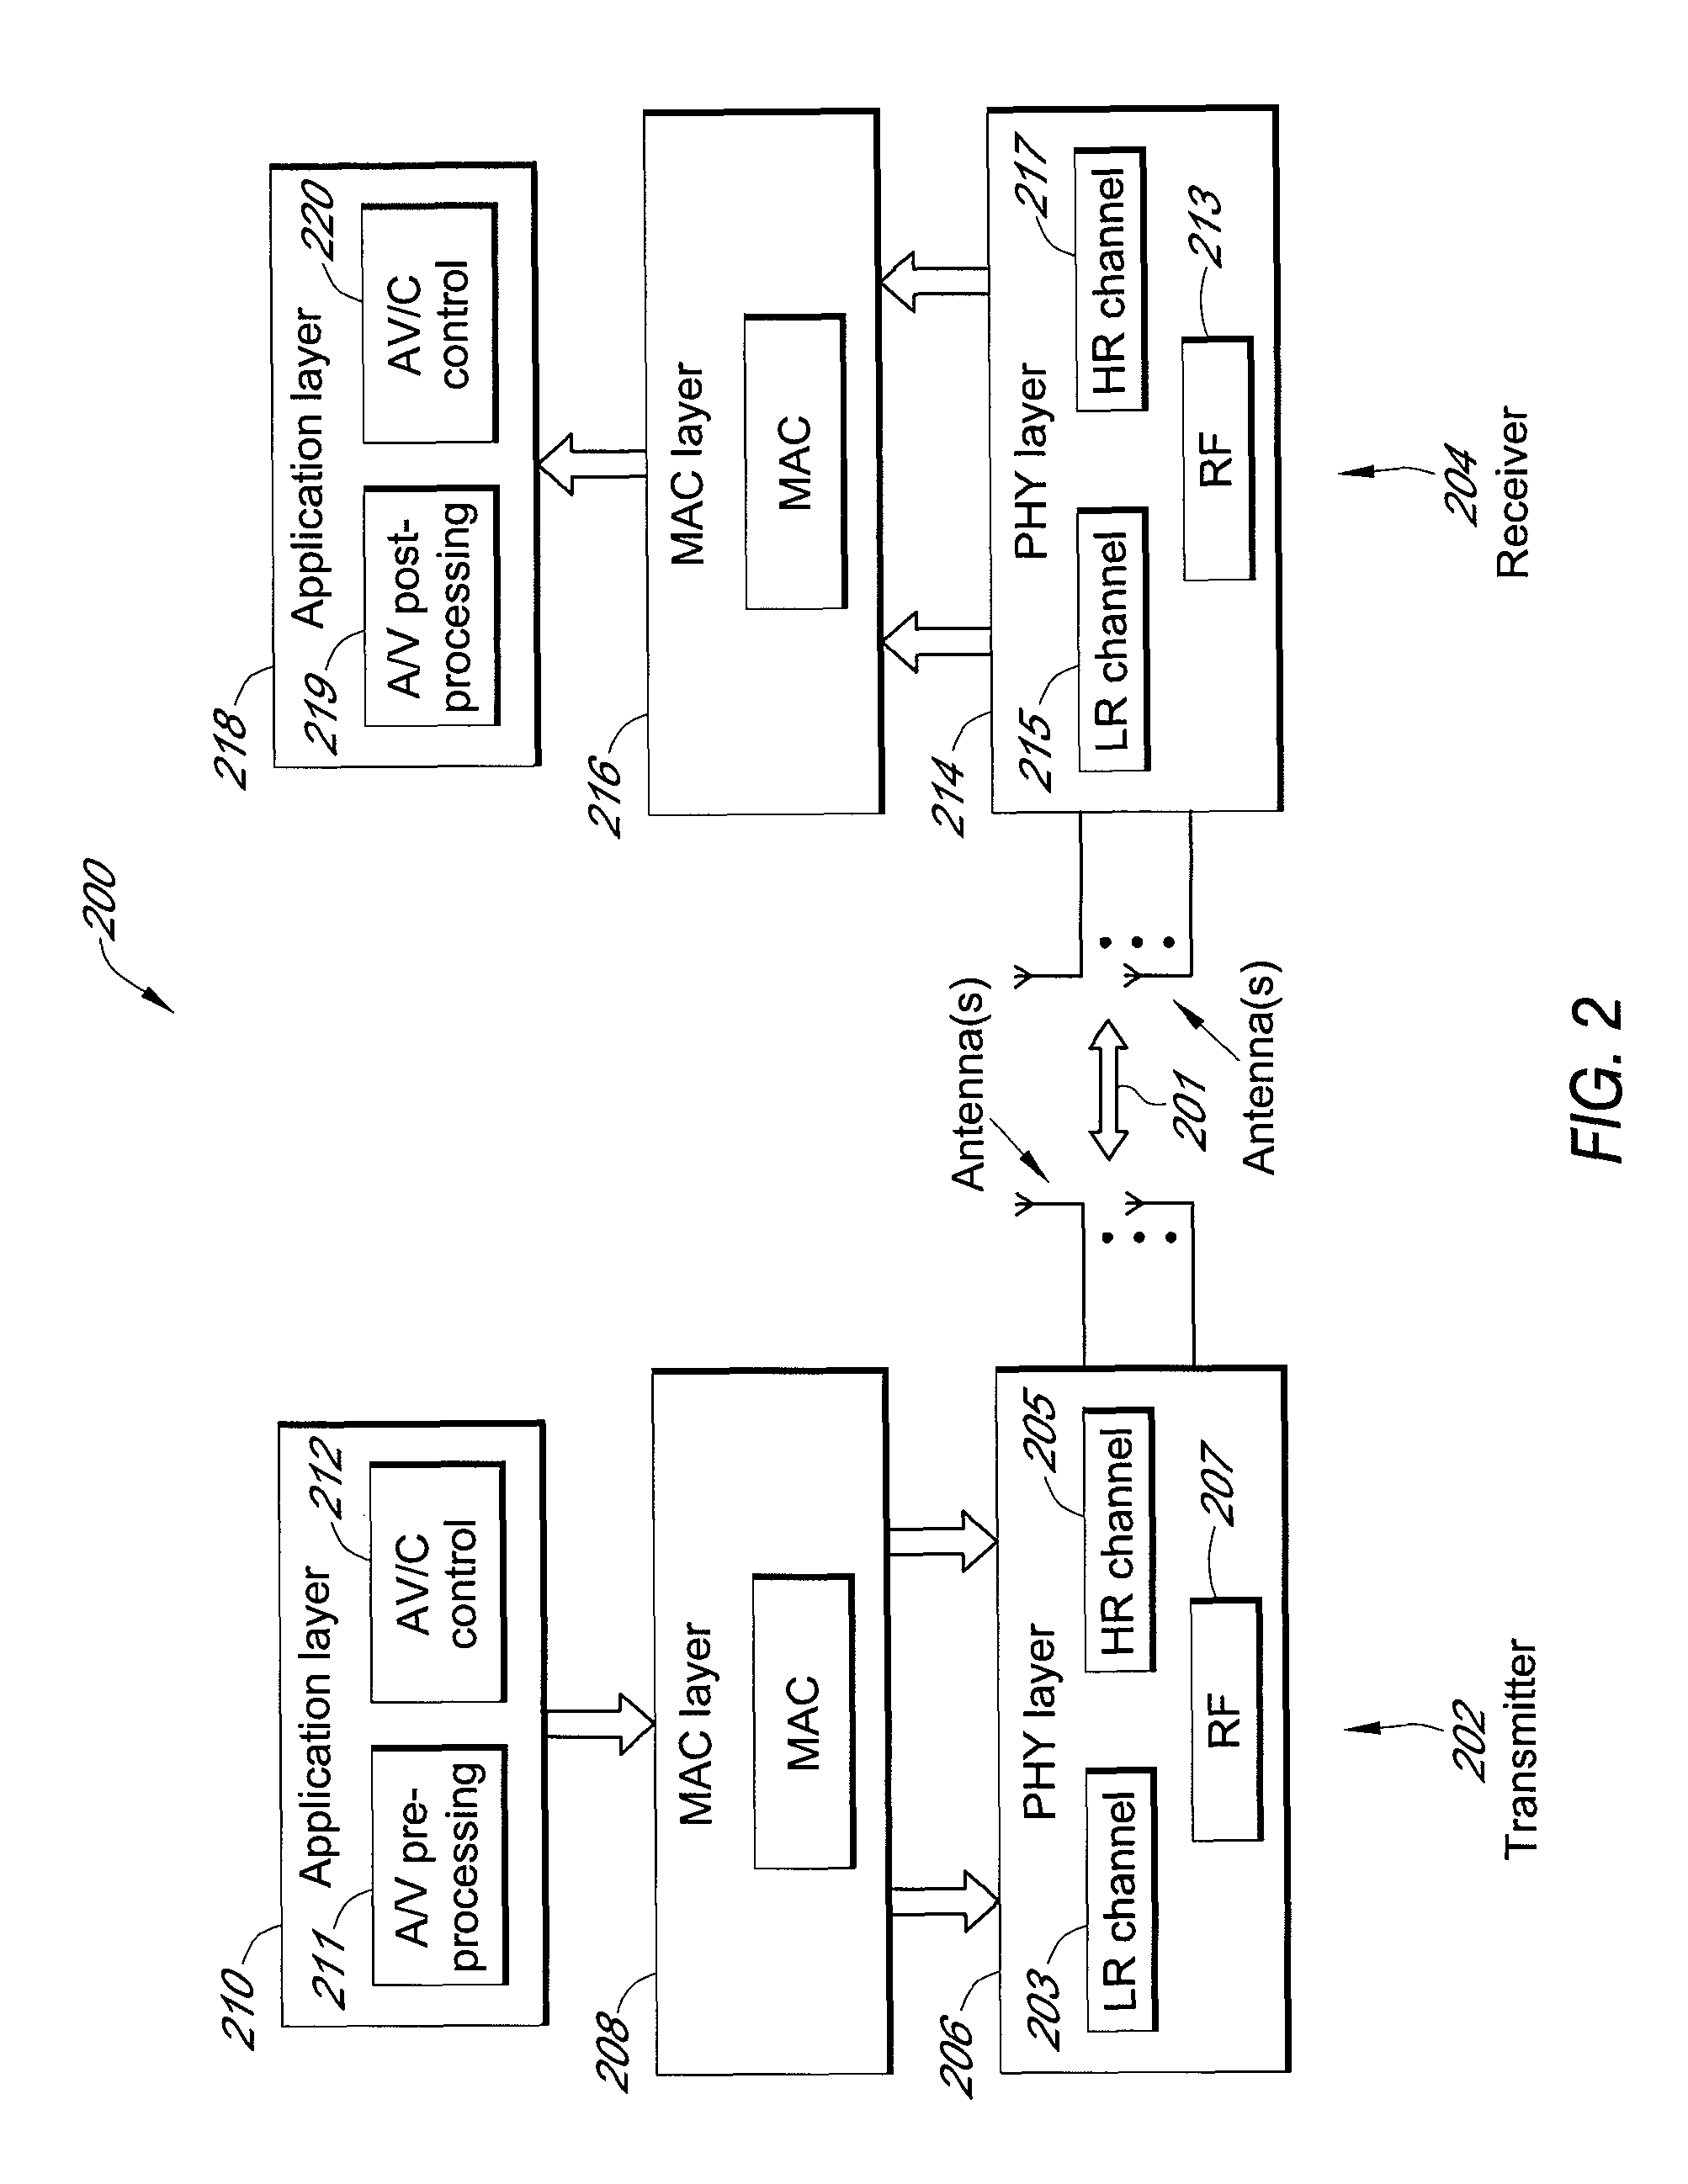 System and method for wireless communication of uncompressed video having a preamble design